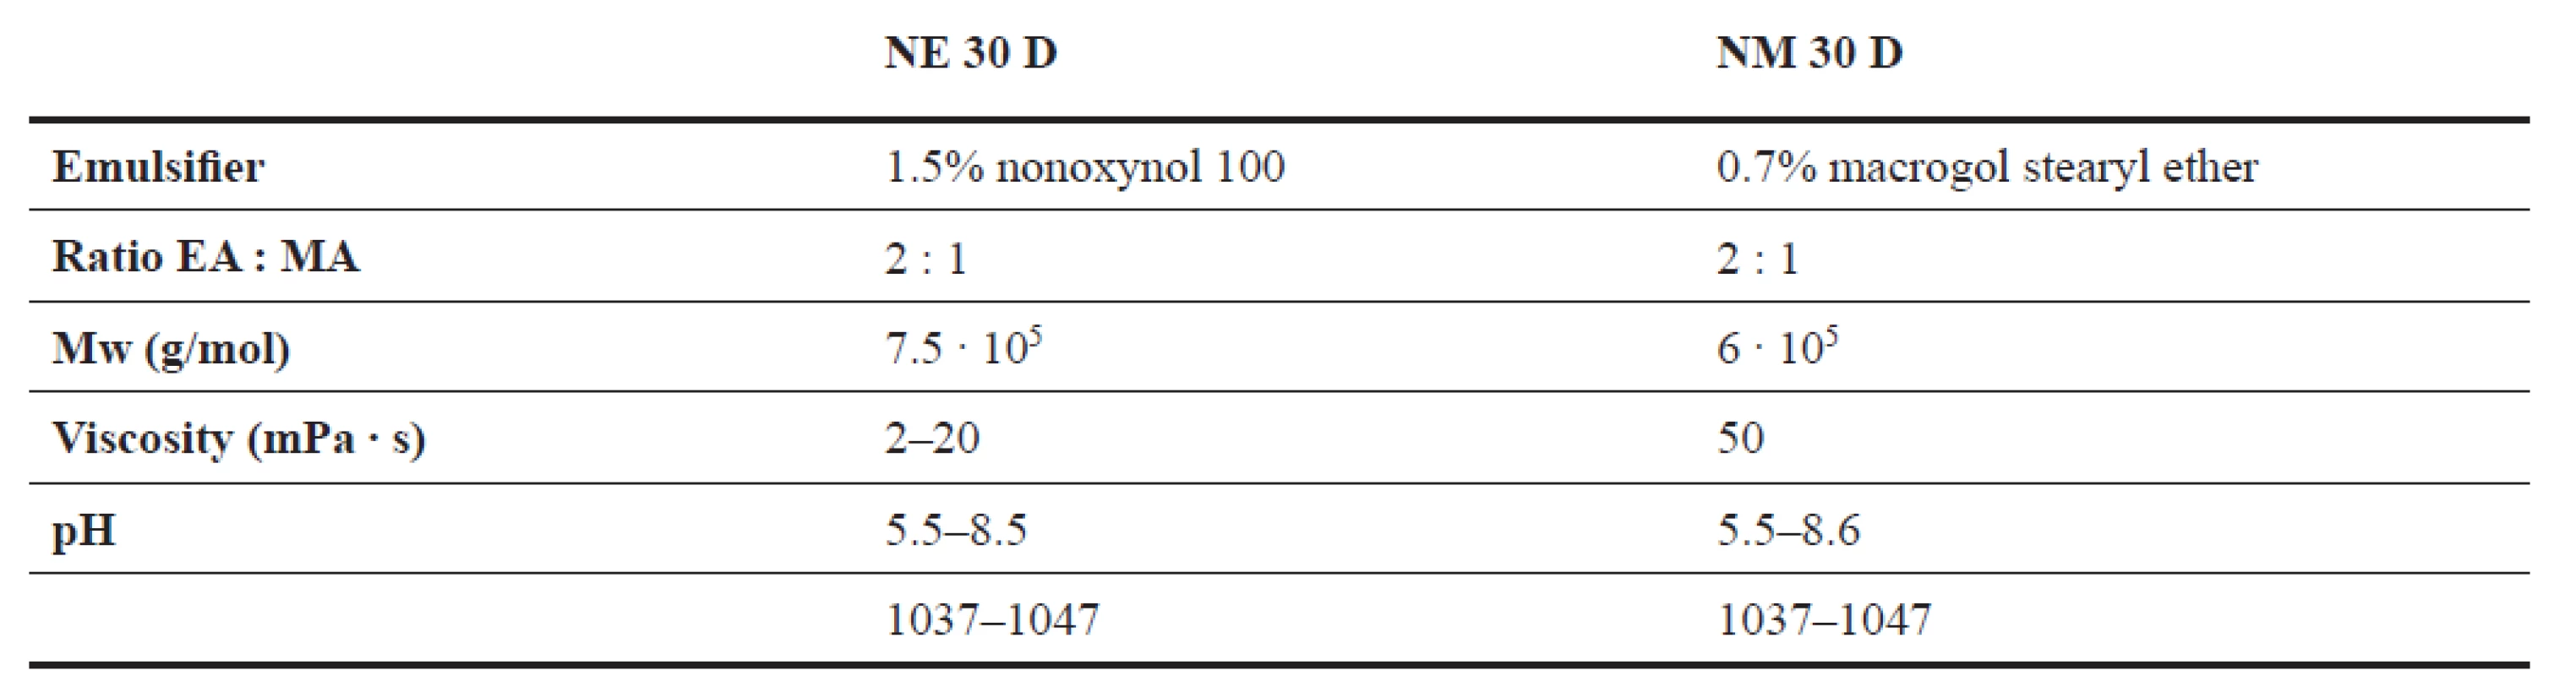 Characteristics of Eudragit® NE 30 D and NM 30 D<sup>1)</sup>